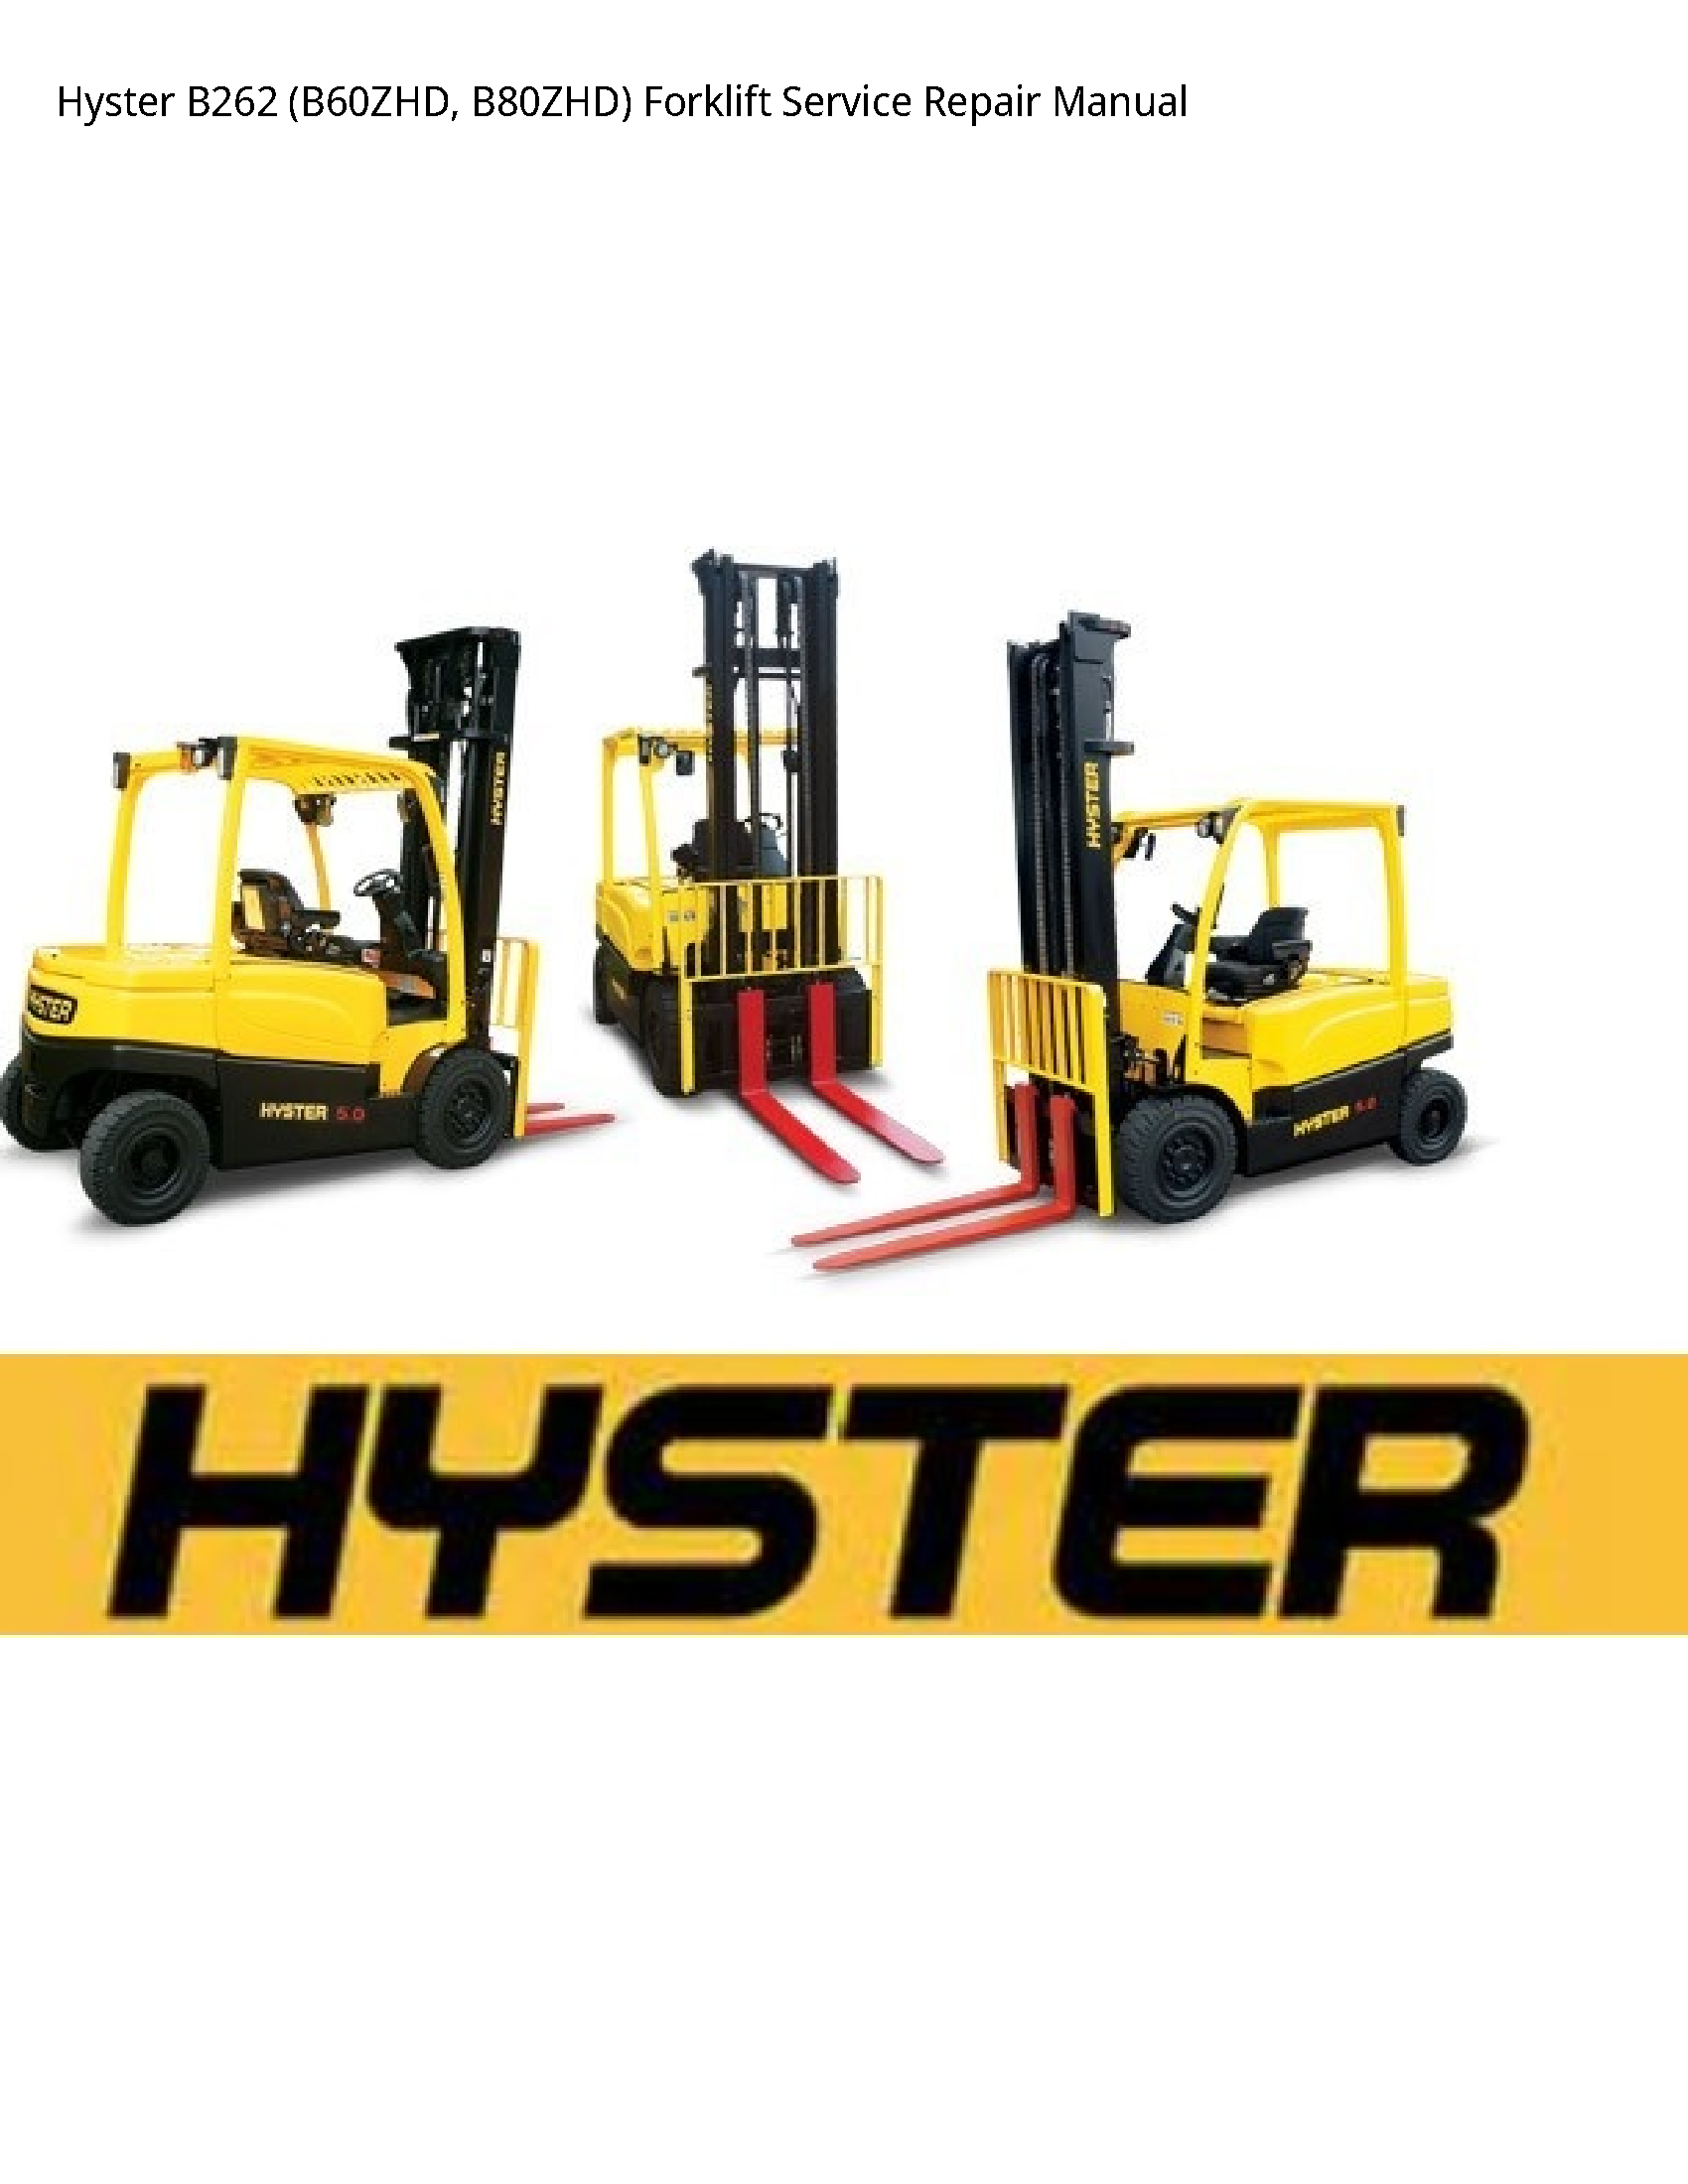 Hyster B262 Forklift manual